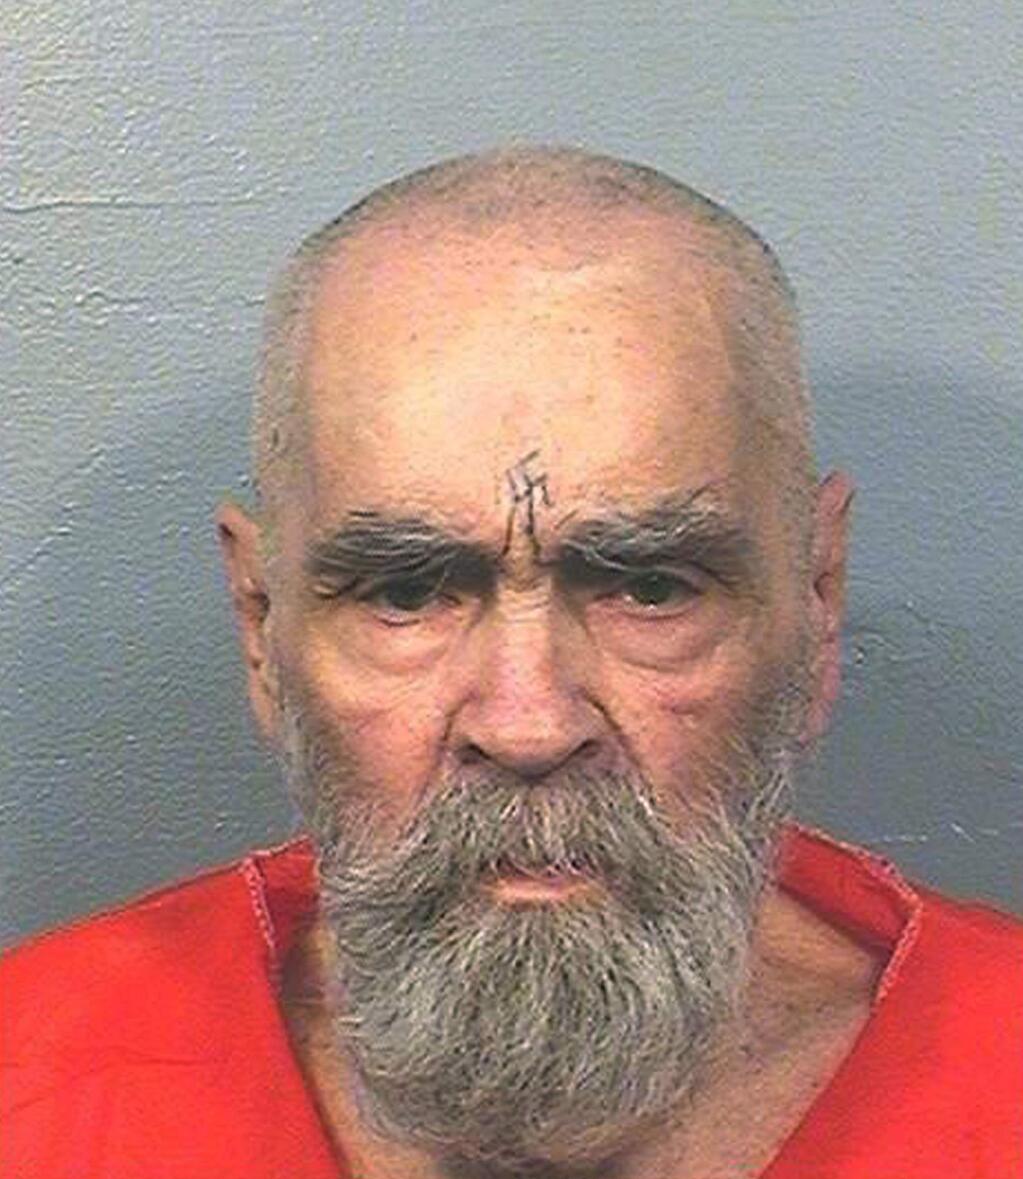 FILE - This Aug. 14, 2017 file photo provided by the California Department of Corrections and Rehabilitation shows Charles Manson. (California Department of Corrections and Rehabilitation via AP, File)